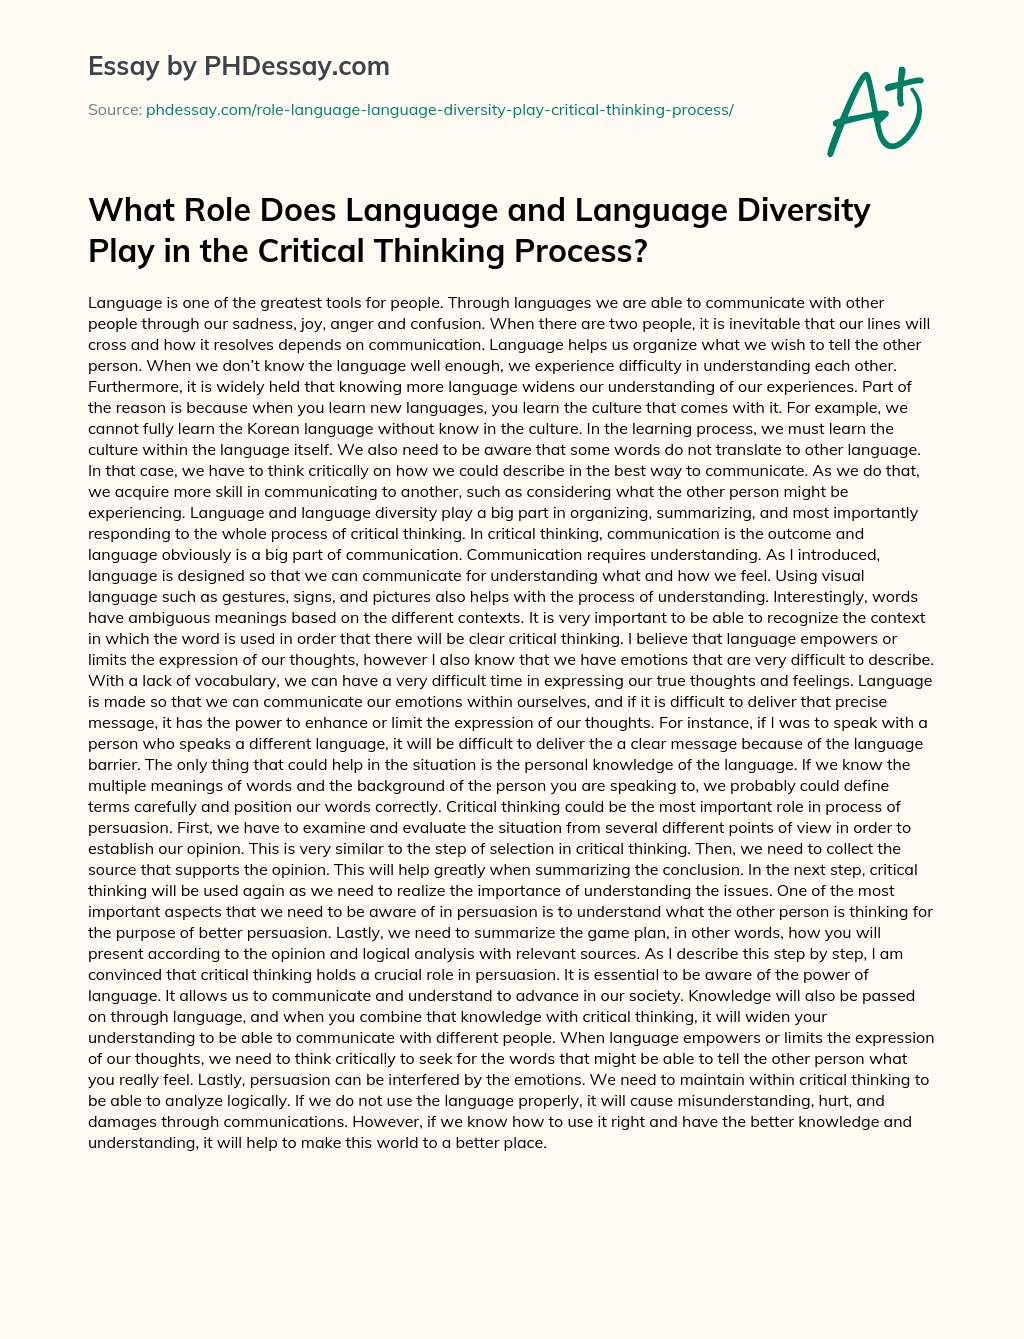 What Role Does Language and Language Diversity Play in the Critical Thinking Process? essay